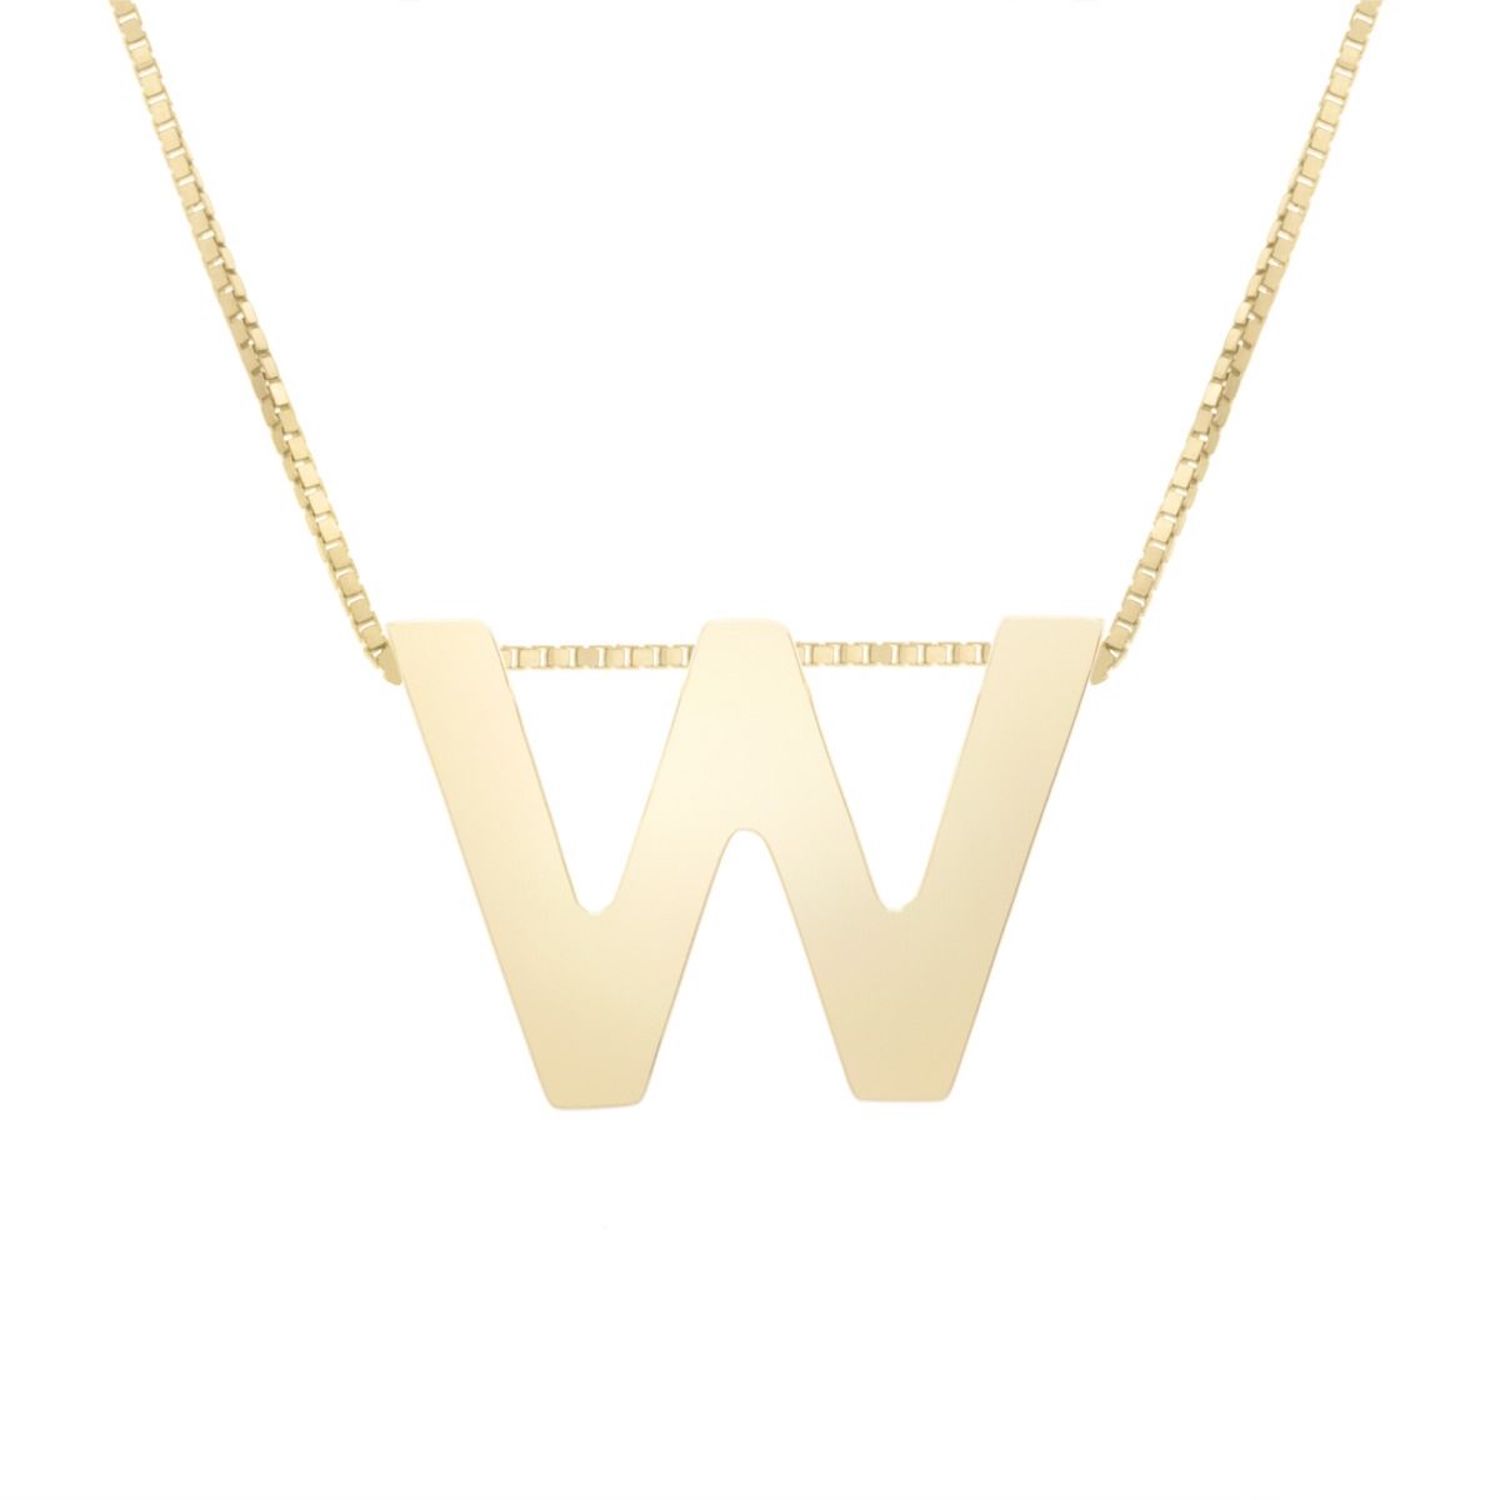 14K Yellow Gold Block Letter Initial Pendant Box Chain Necklace 16"-18" - W